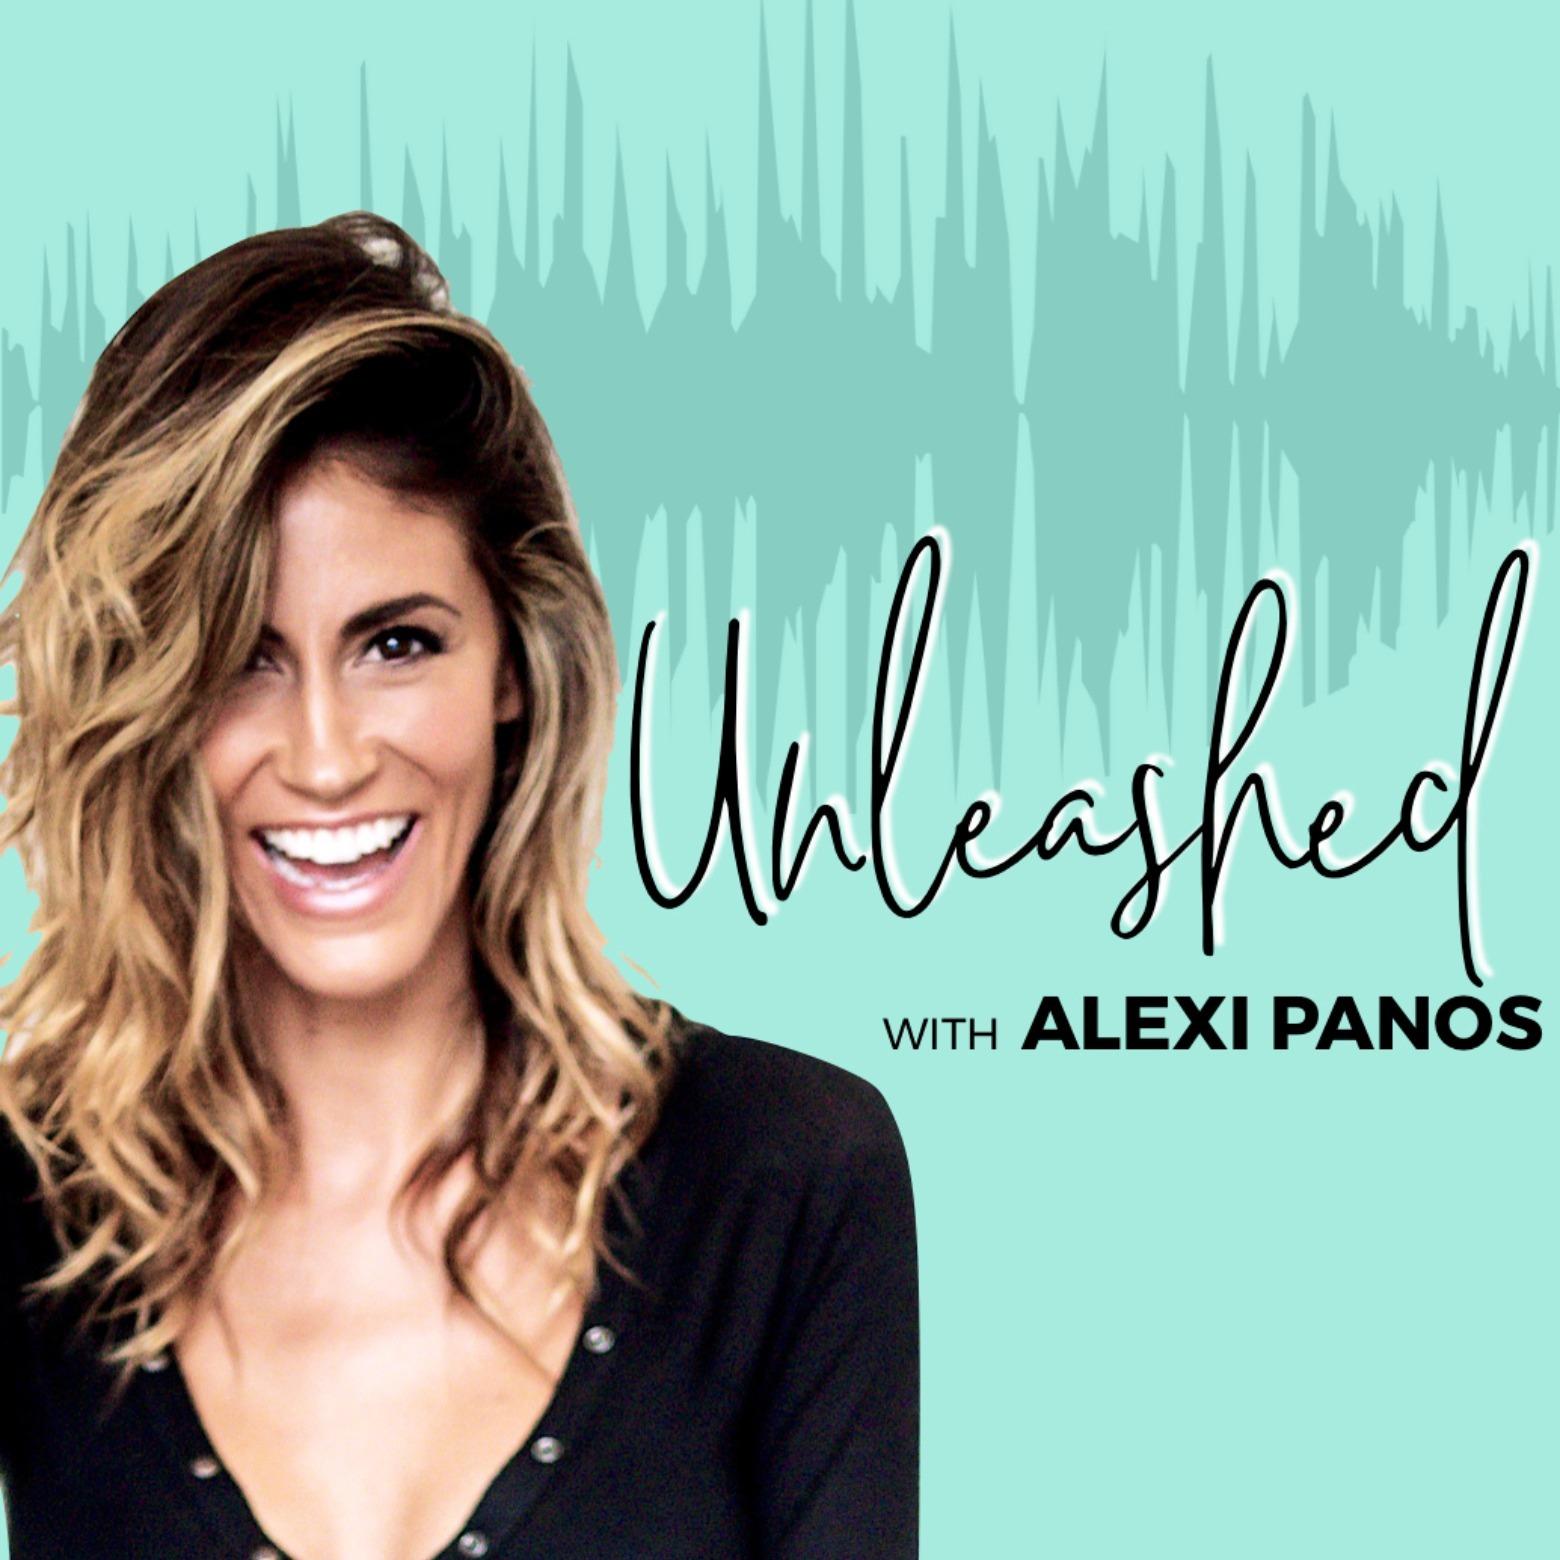 UNLEASHED with Alexi Panos®- Happiness, Personal Development, Leadership, Purpose, Success, Money, Relationships and Motivation to Live Your Best Life!